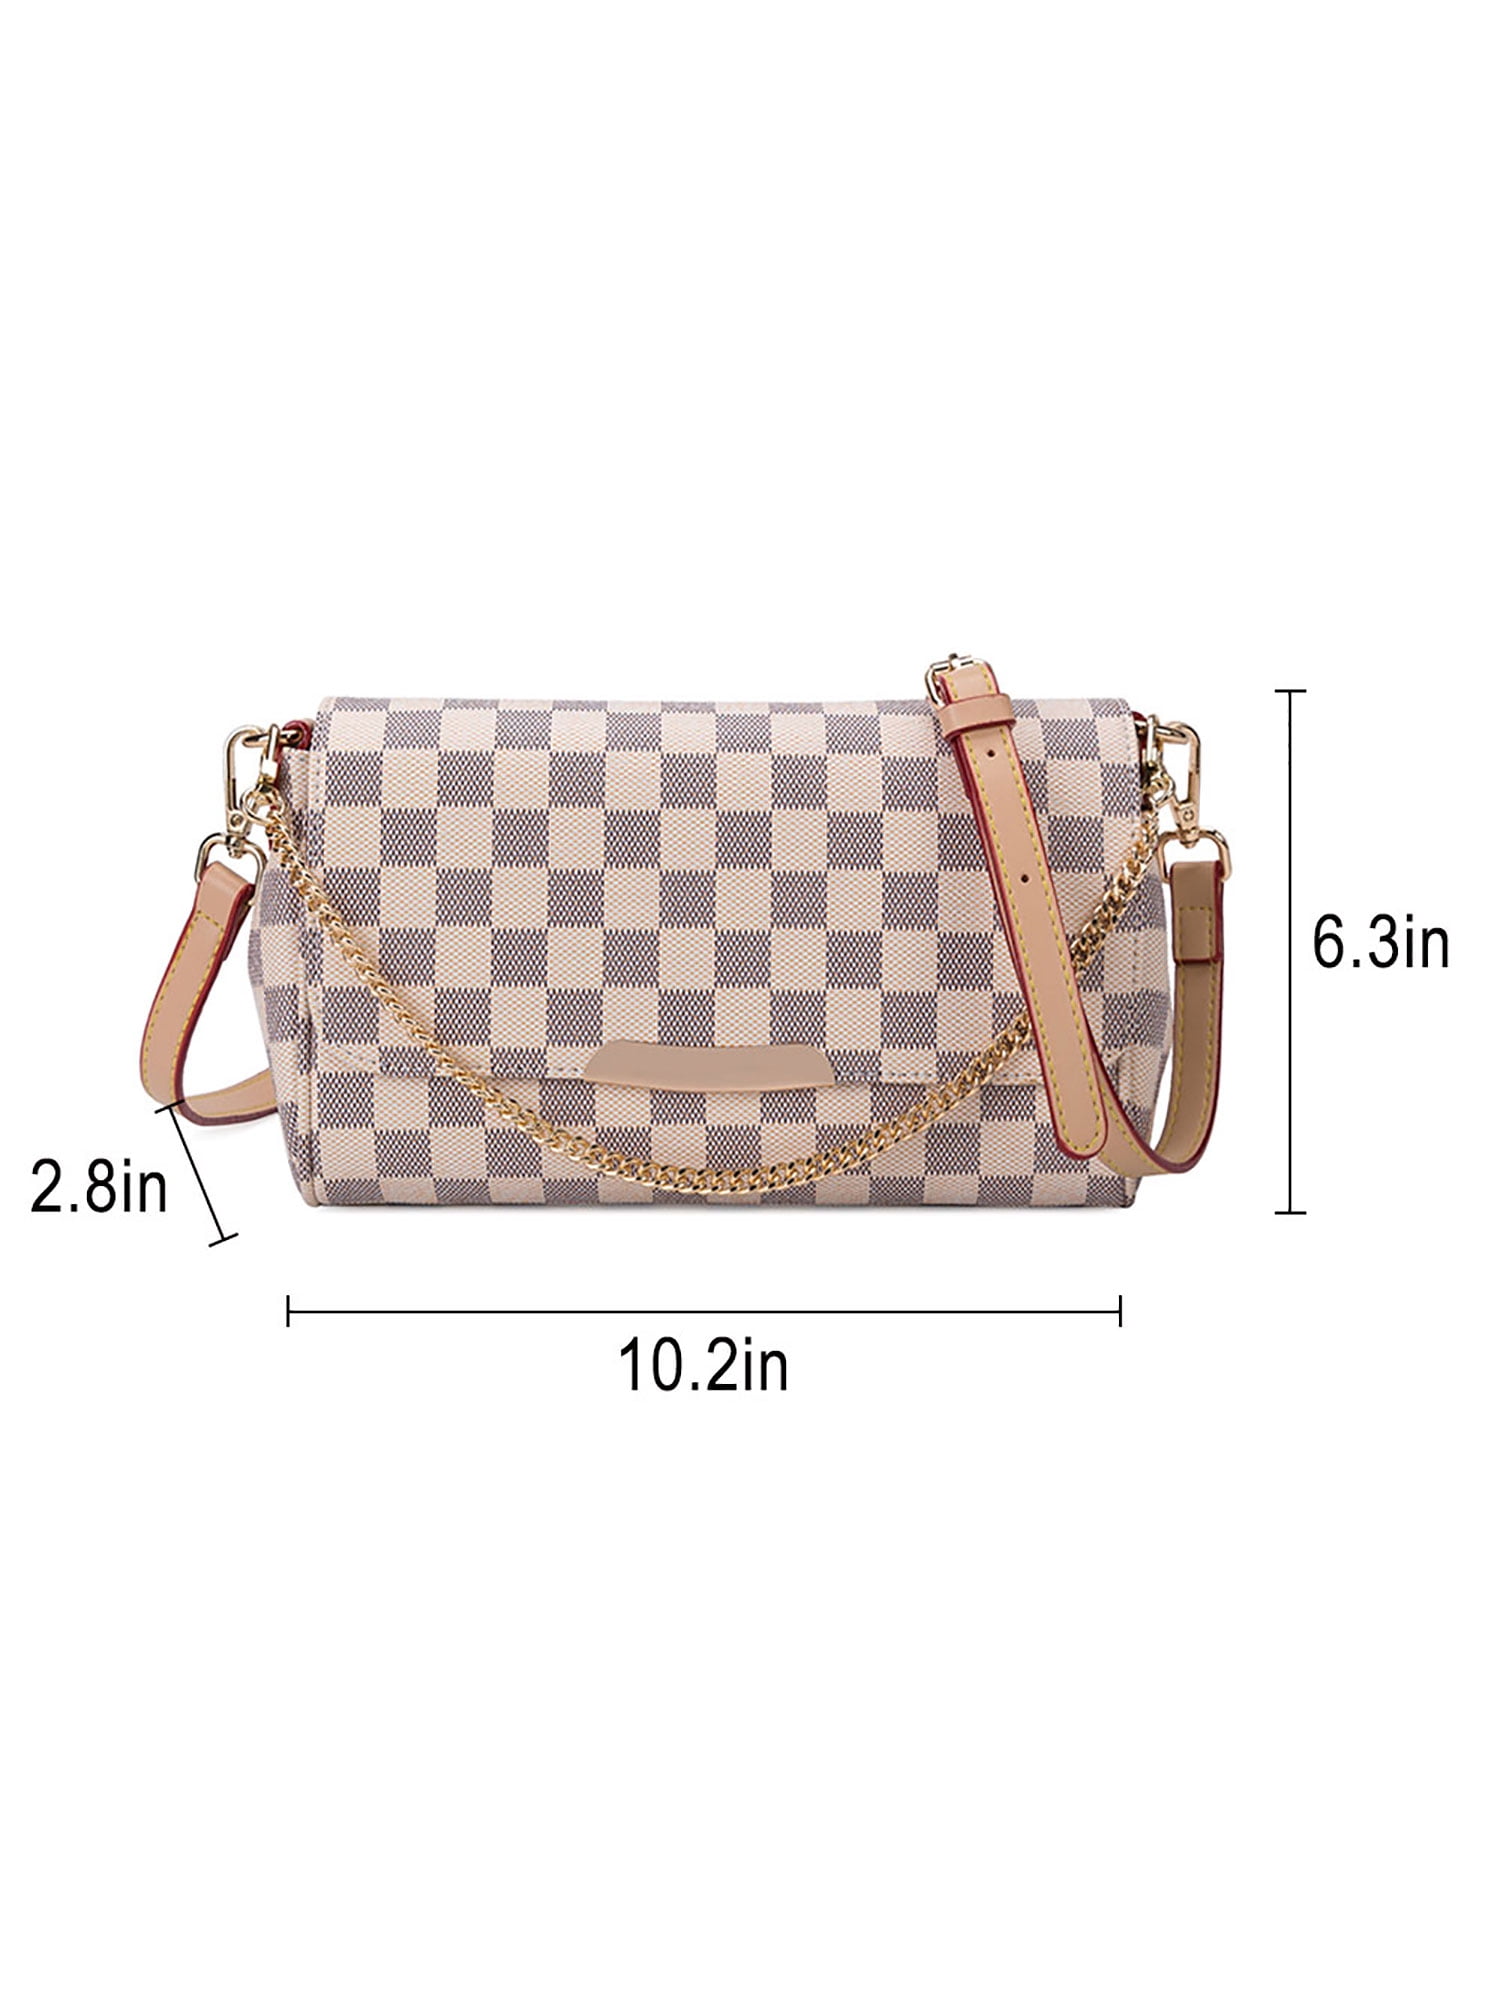 LUXUR 3-in-1 Checkered Crossbody Bag For Women's-PU Vegan Leather